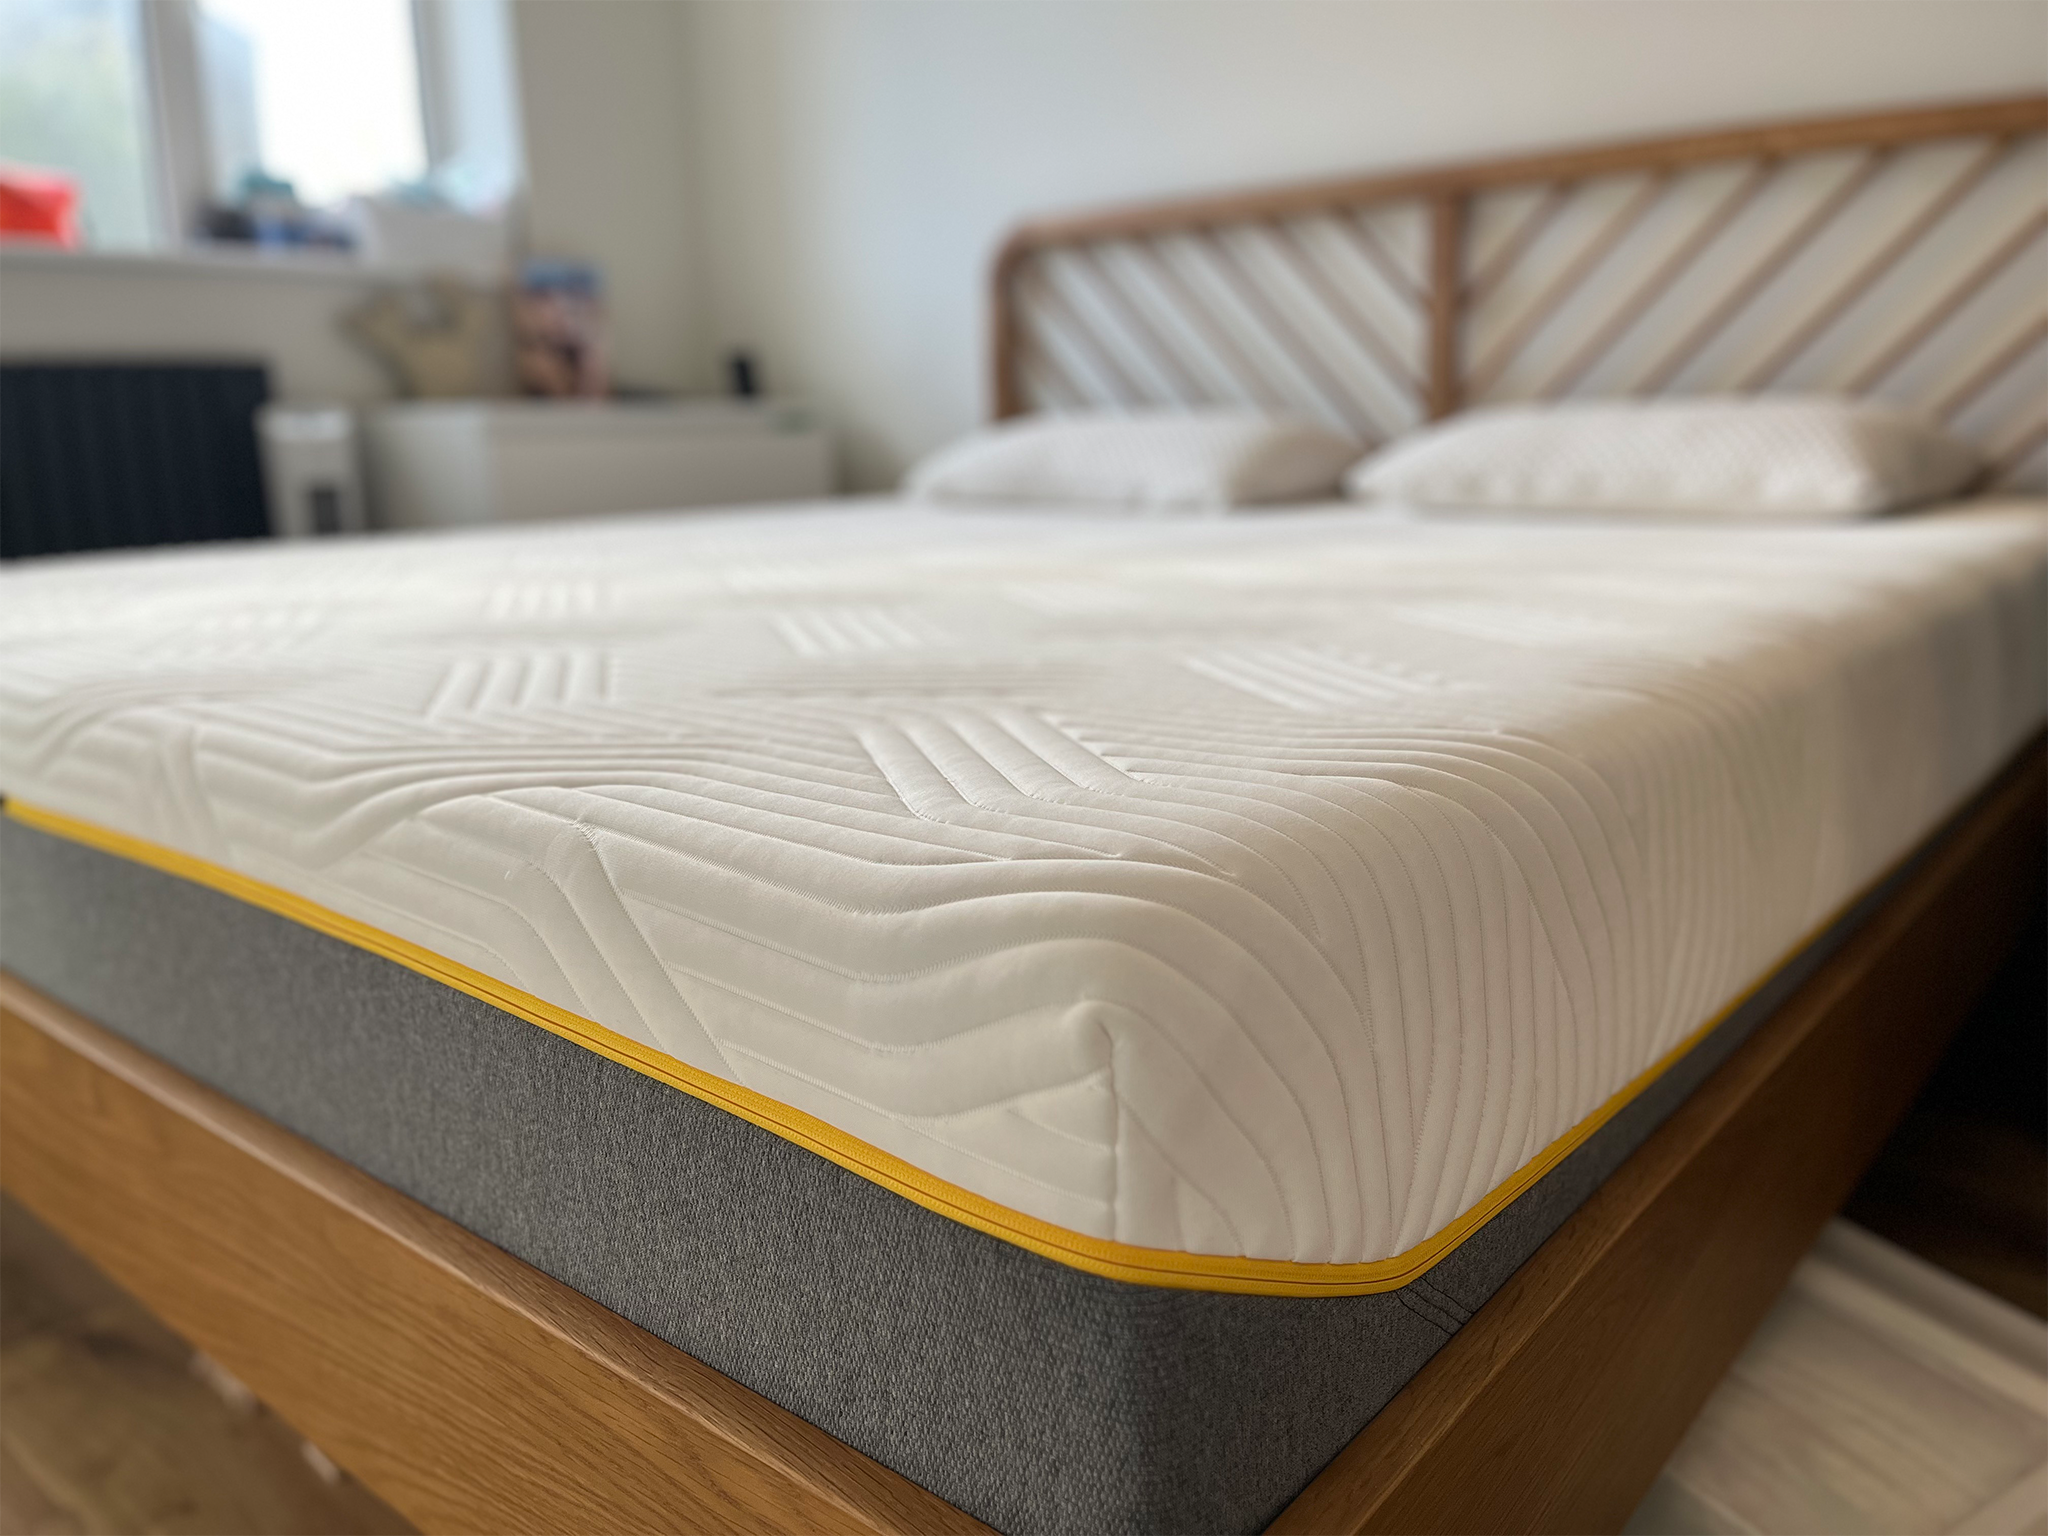 We slept on the Tempur mattress for three months